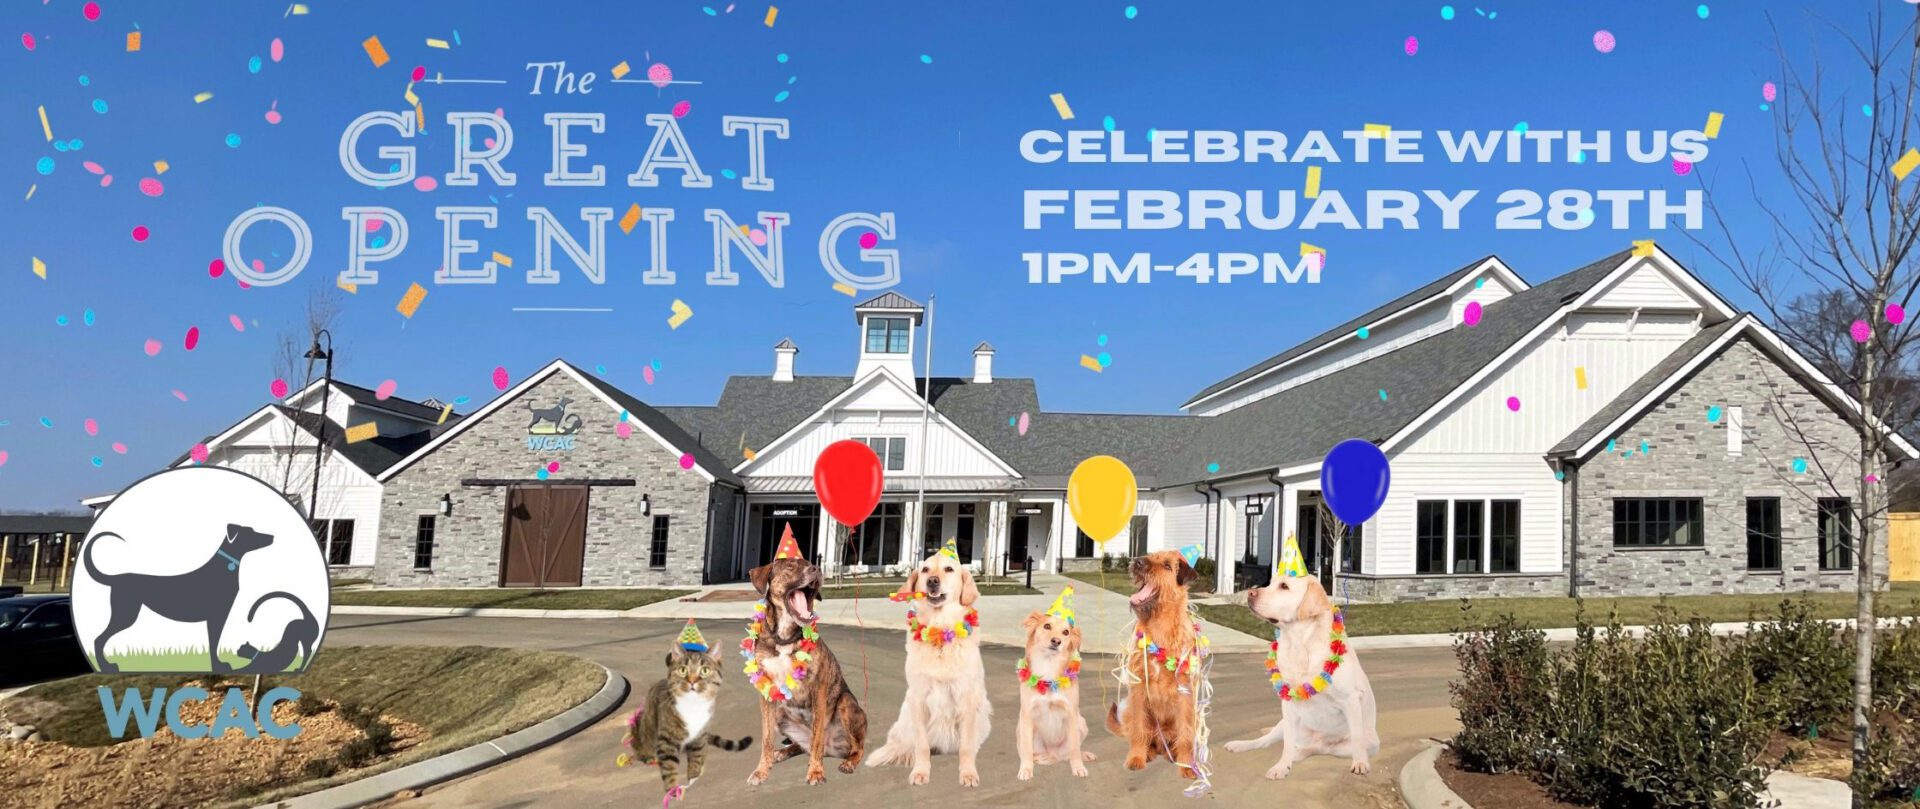 Williamson County Animal Center Grand Opening in Franklin, TN.